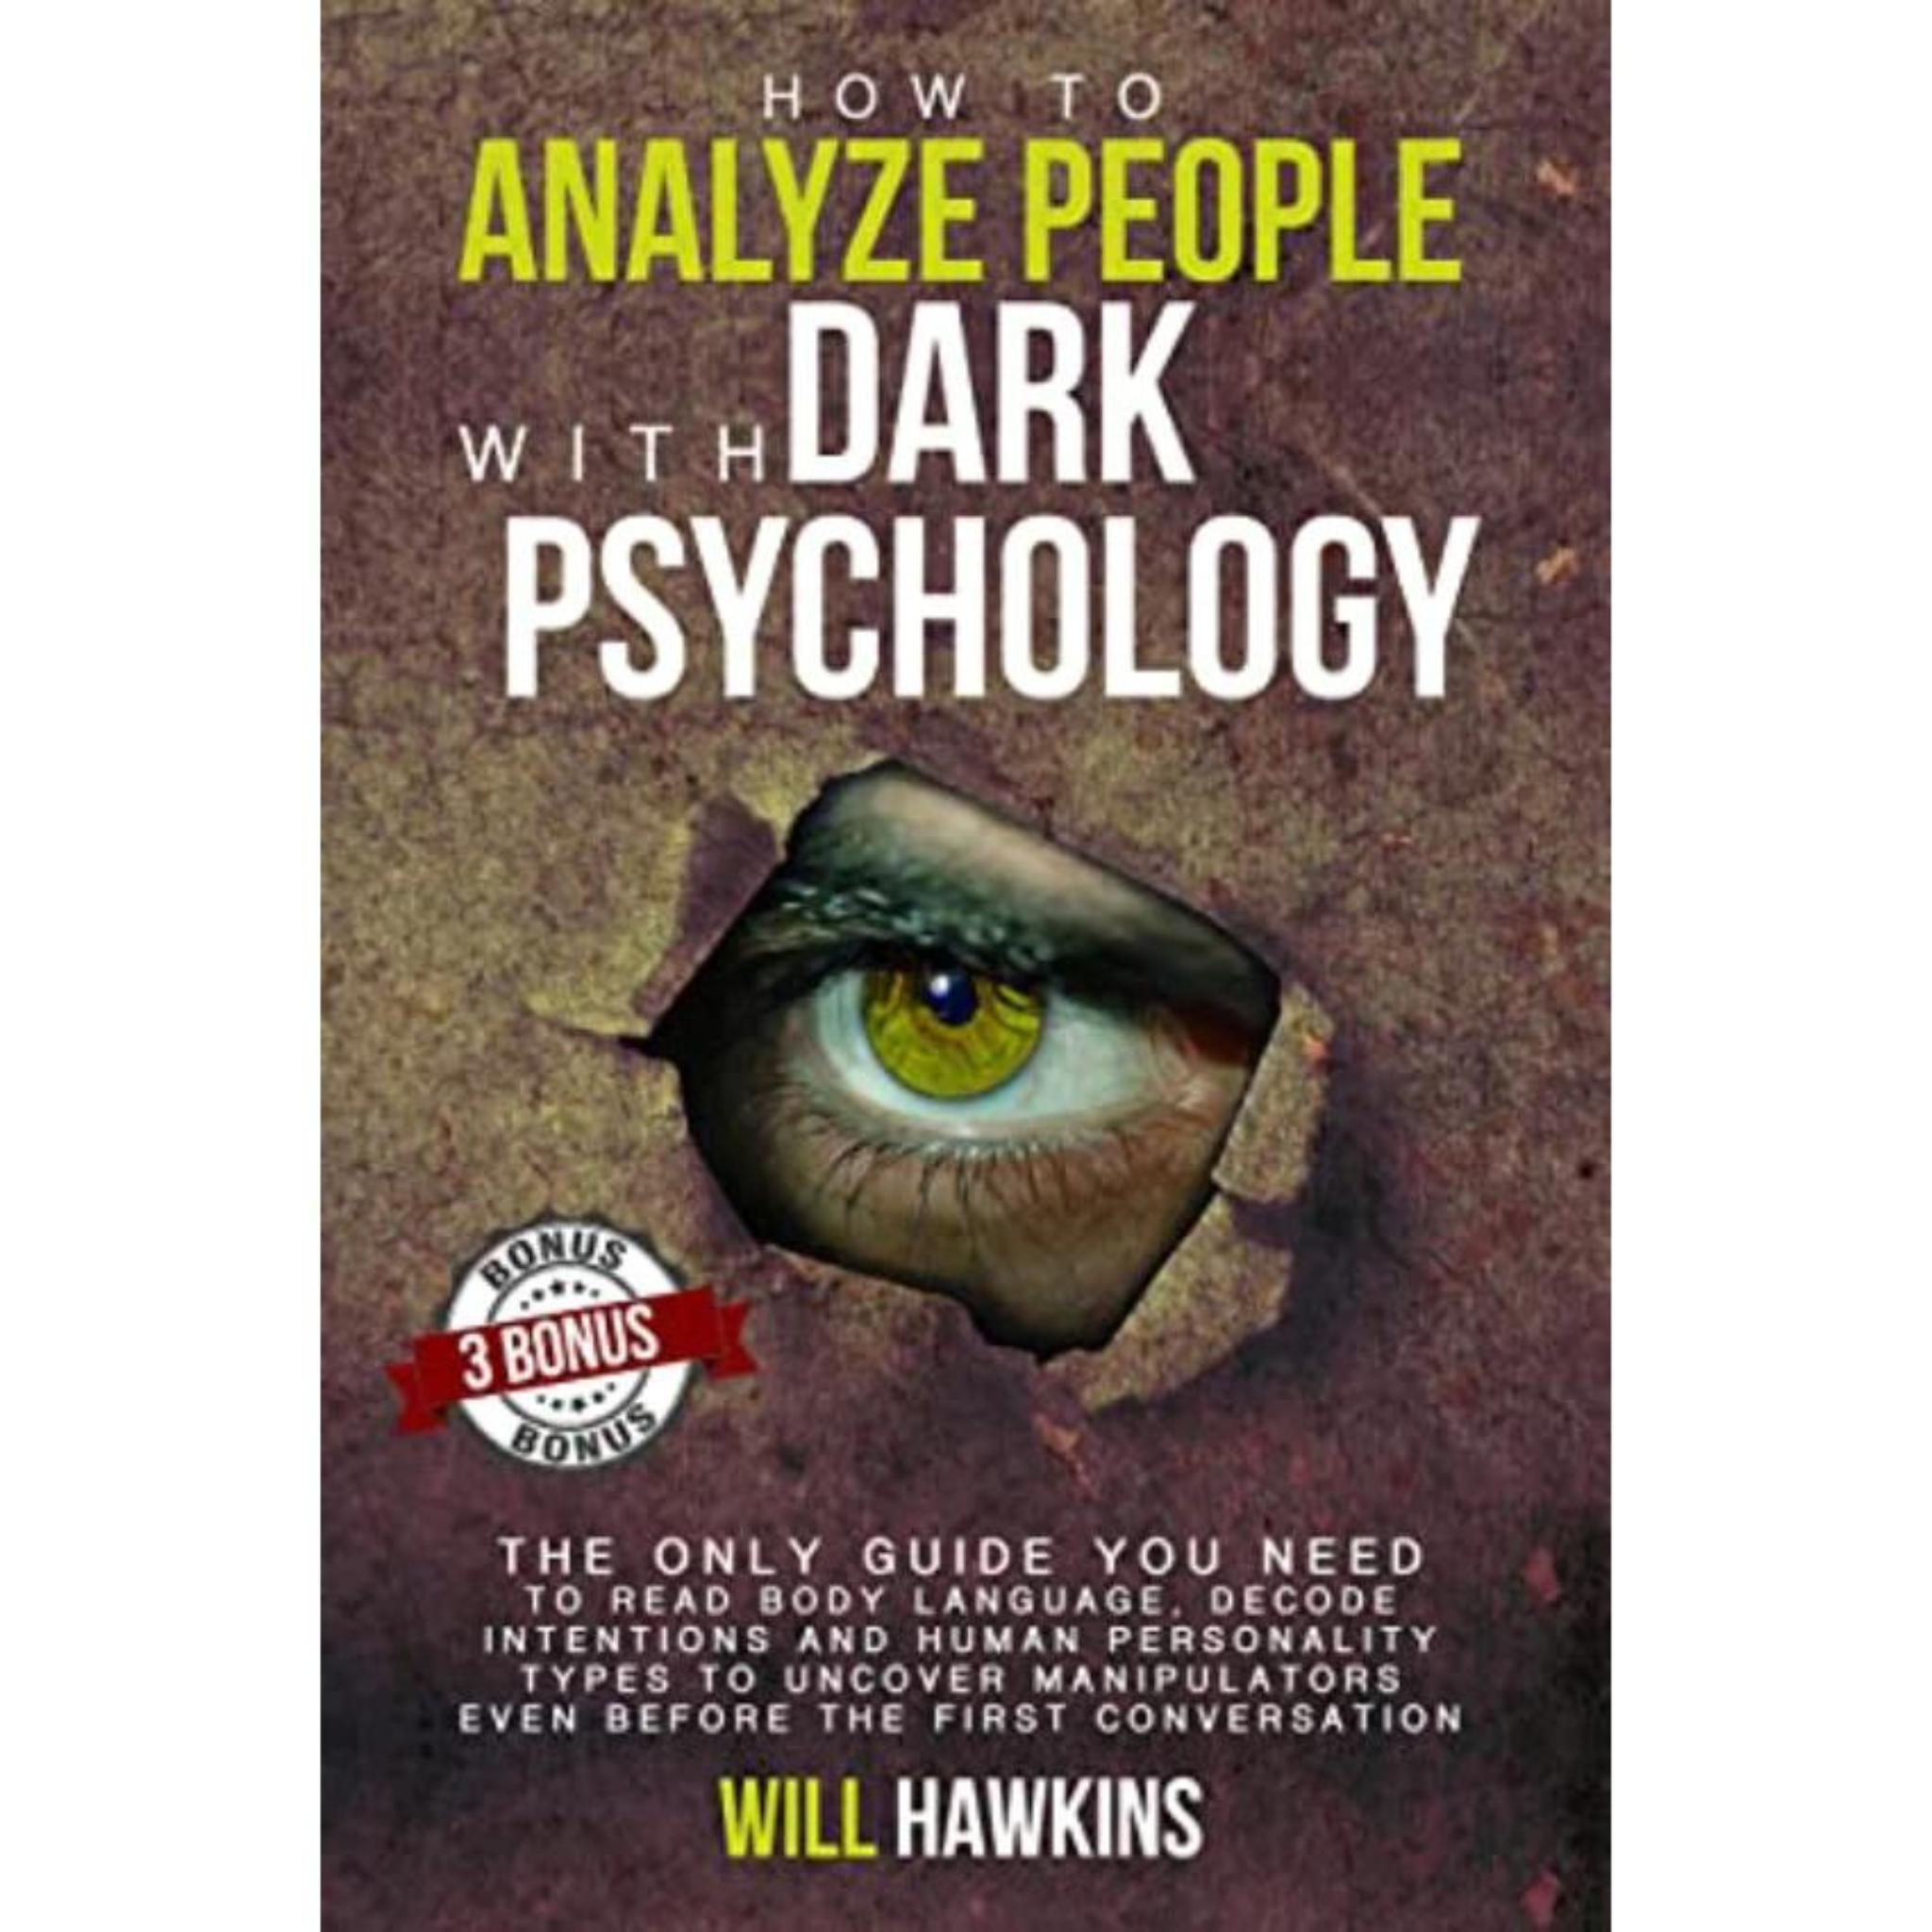 How To Analyze People With Dark Psychology By WILL HAWKINS